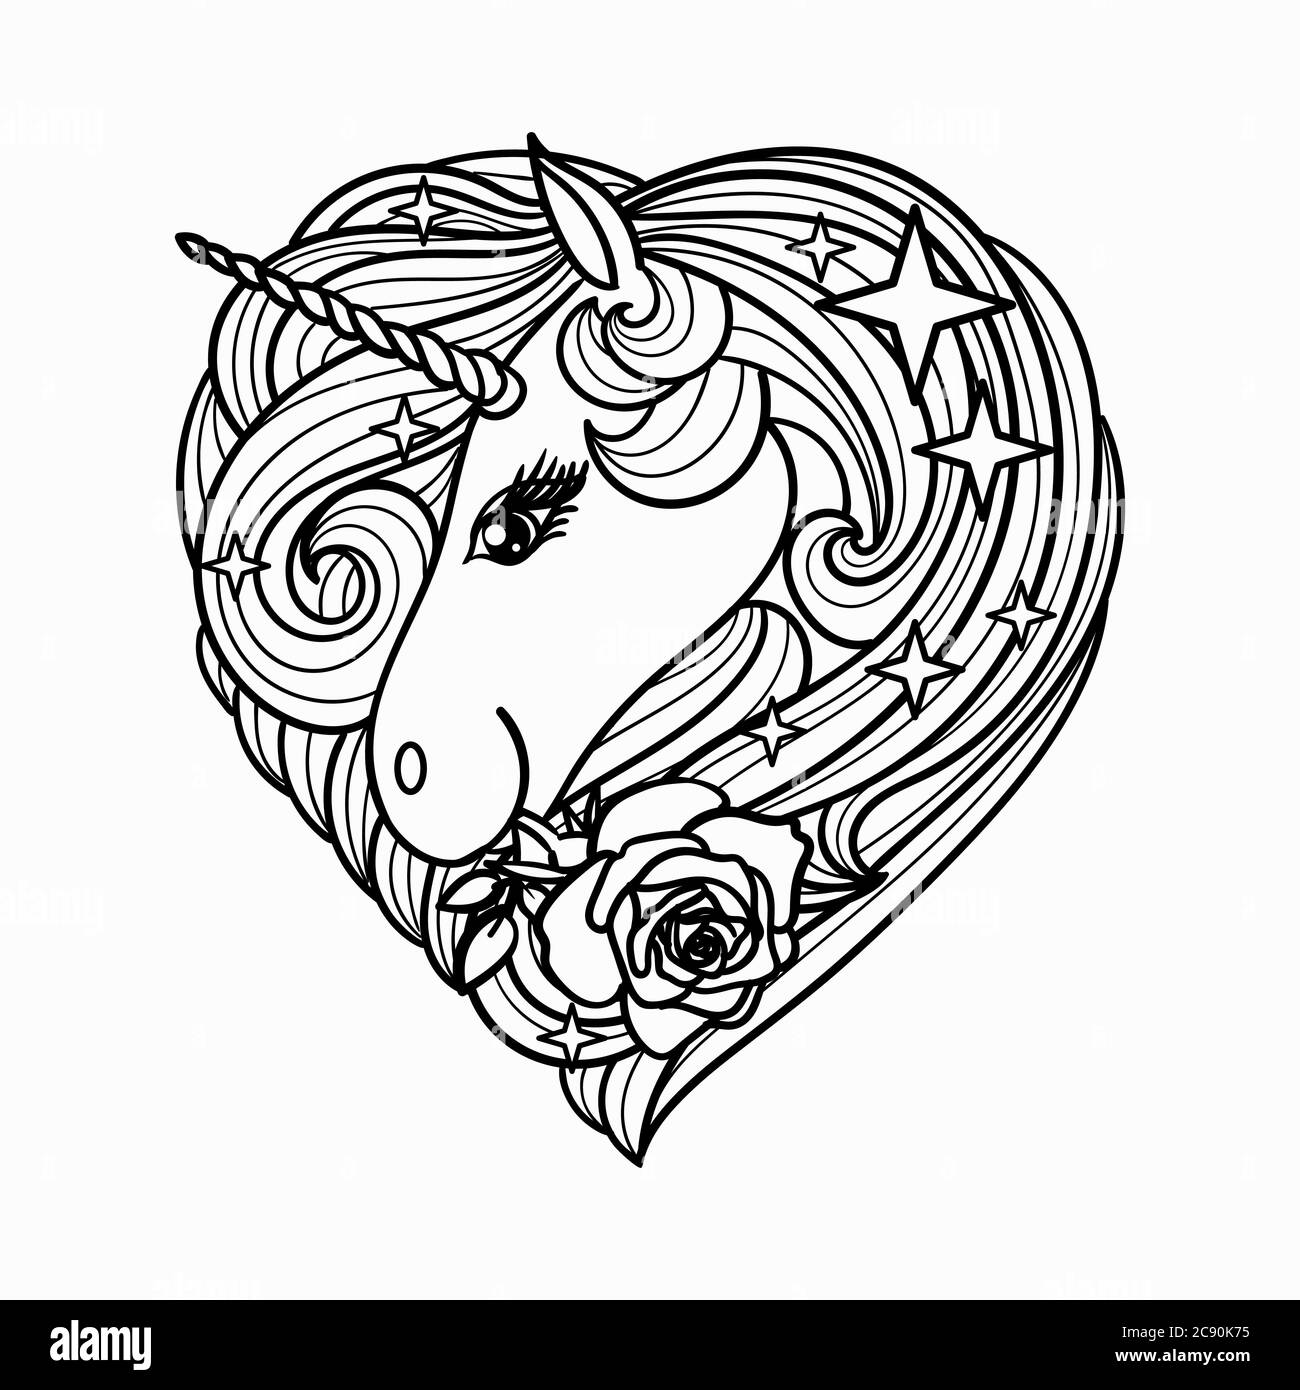 Download Coloring Page Unicorn Children High Resolution Stock Photography And Images Alamy